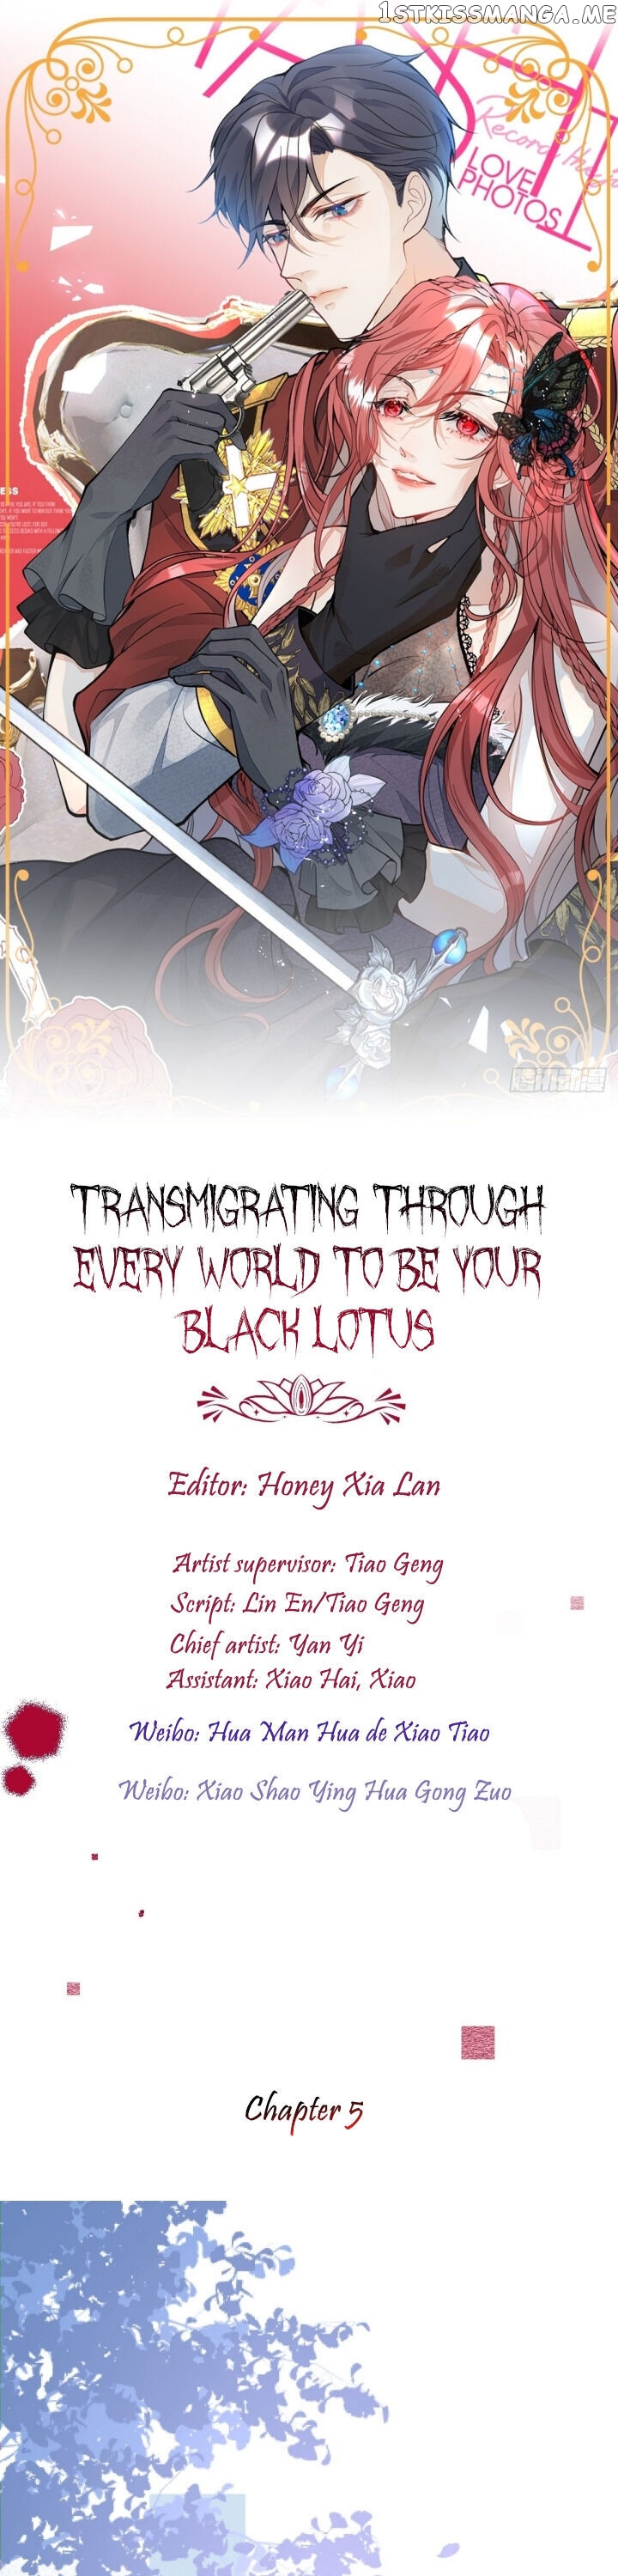 Transmigrating Through Every World To Be Your Black Lotus chapter 5